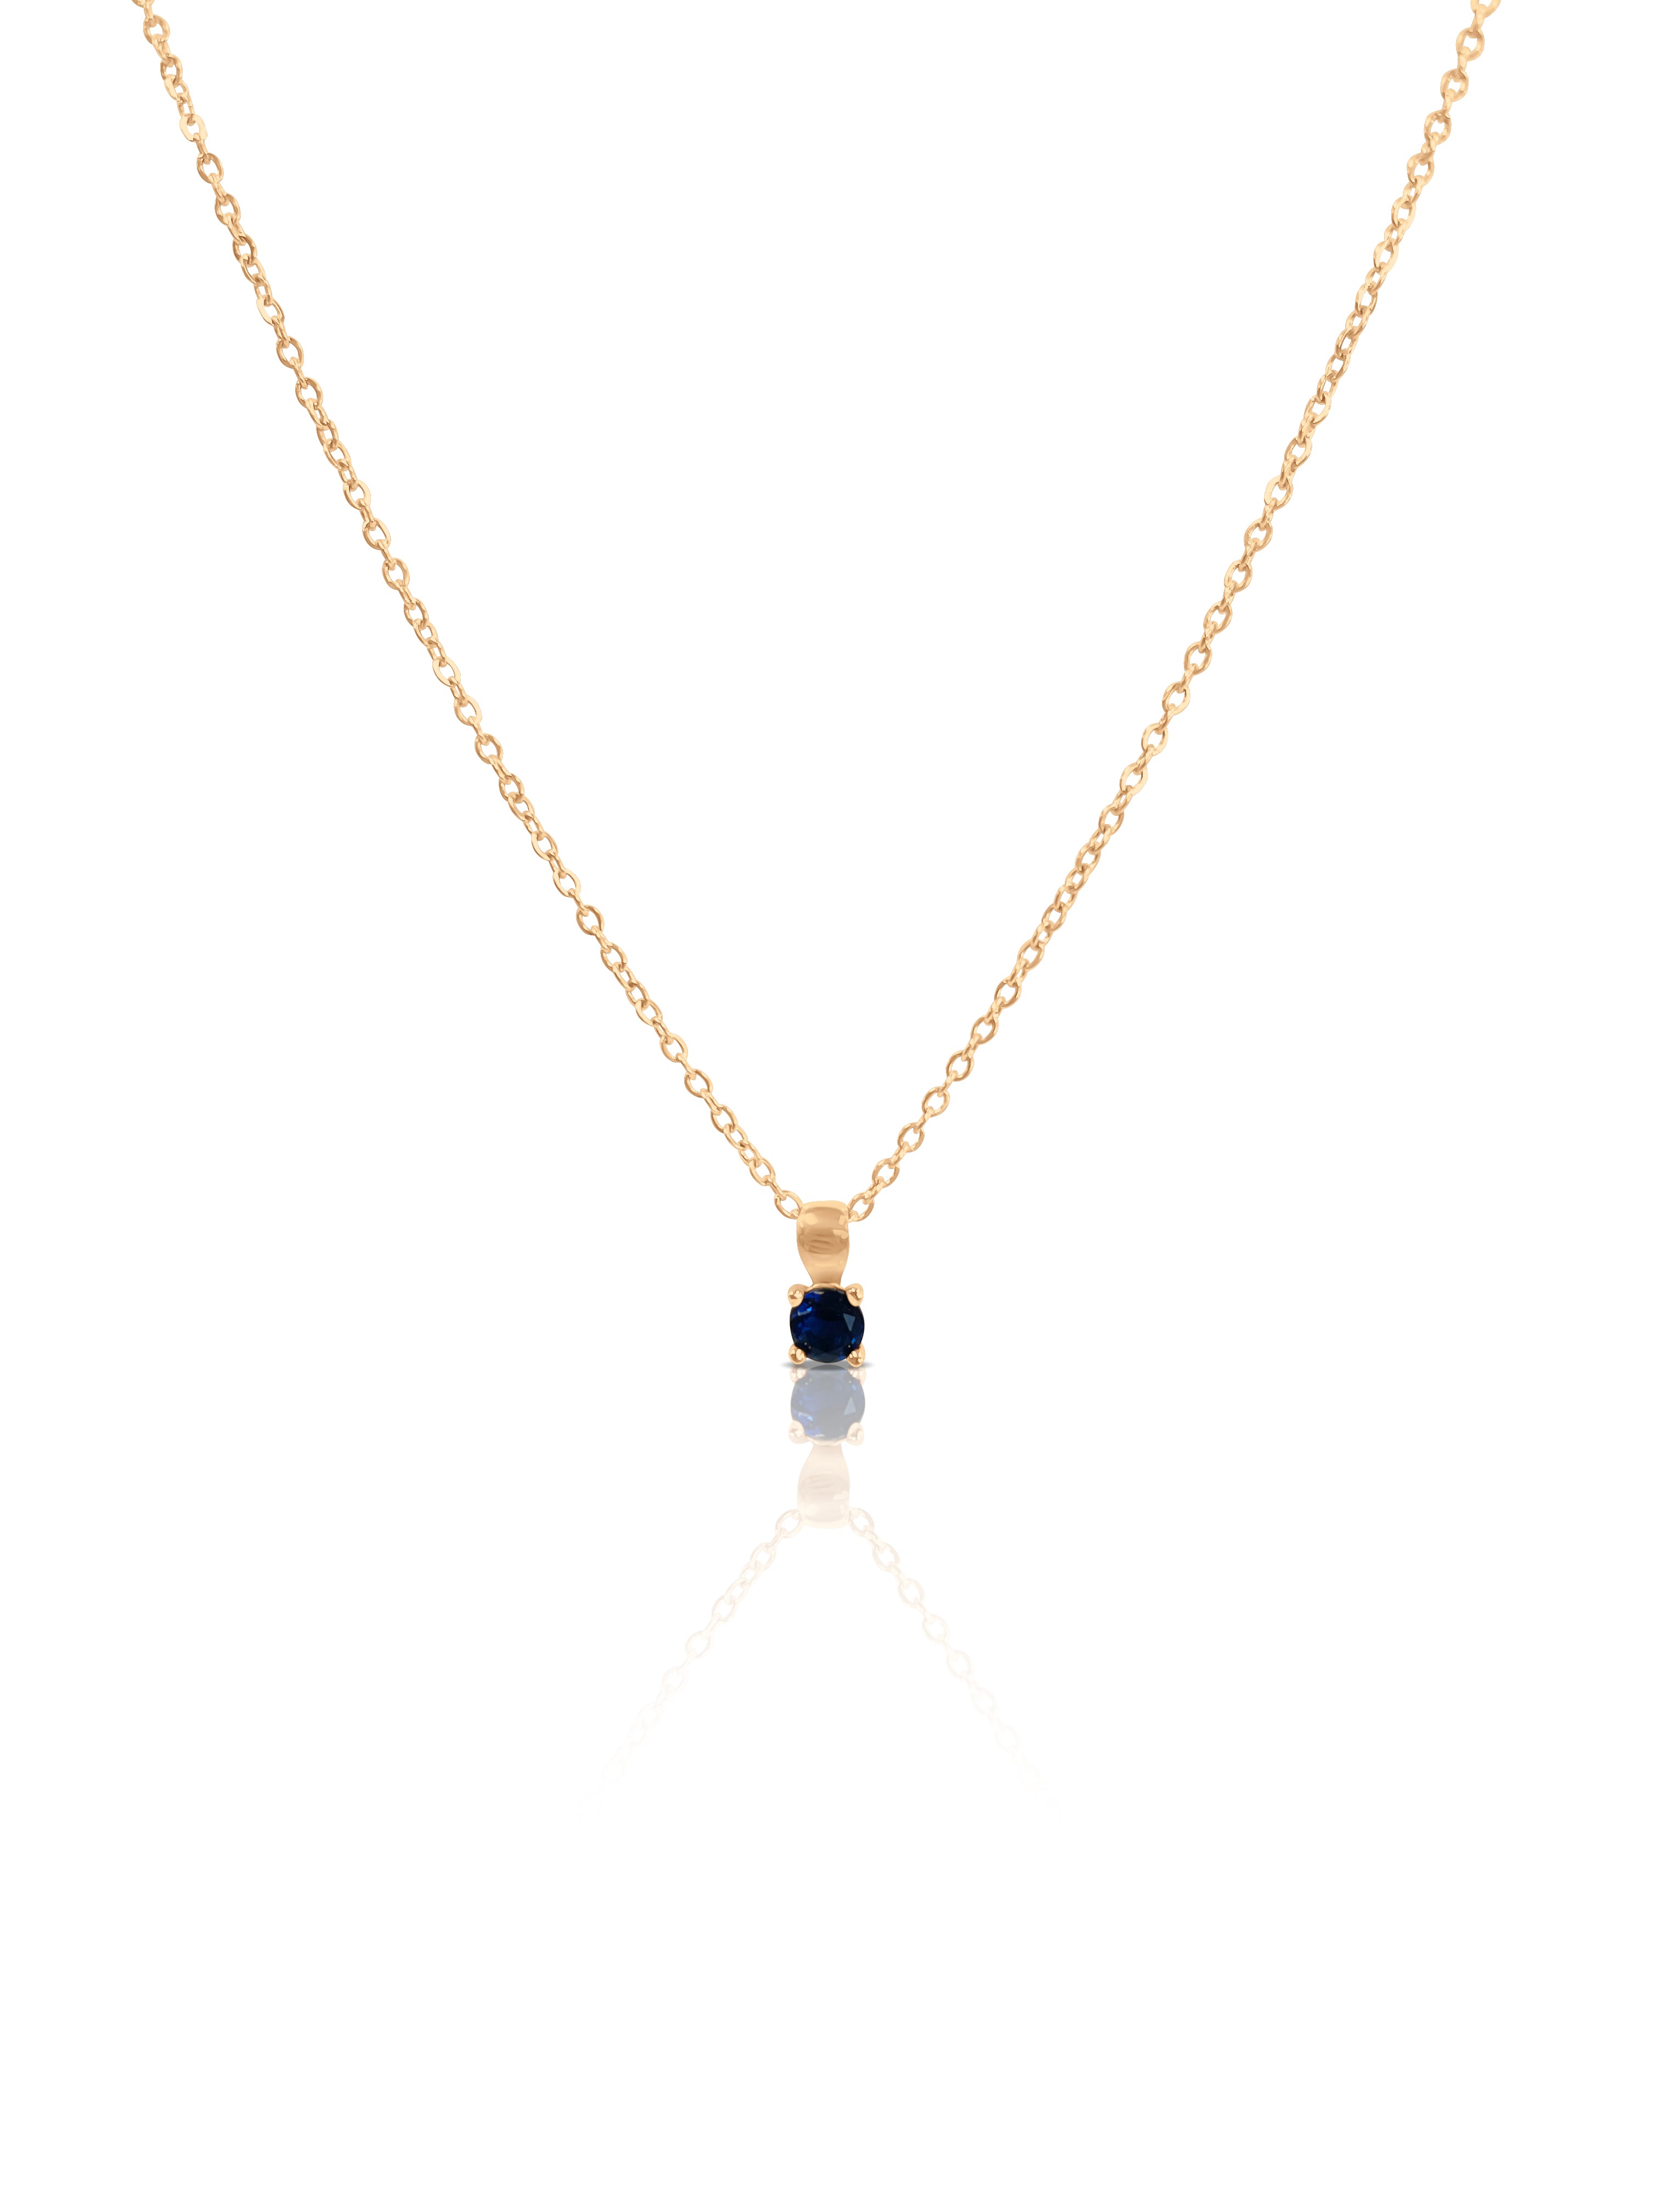 Leah Small Birthstone Necklace